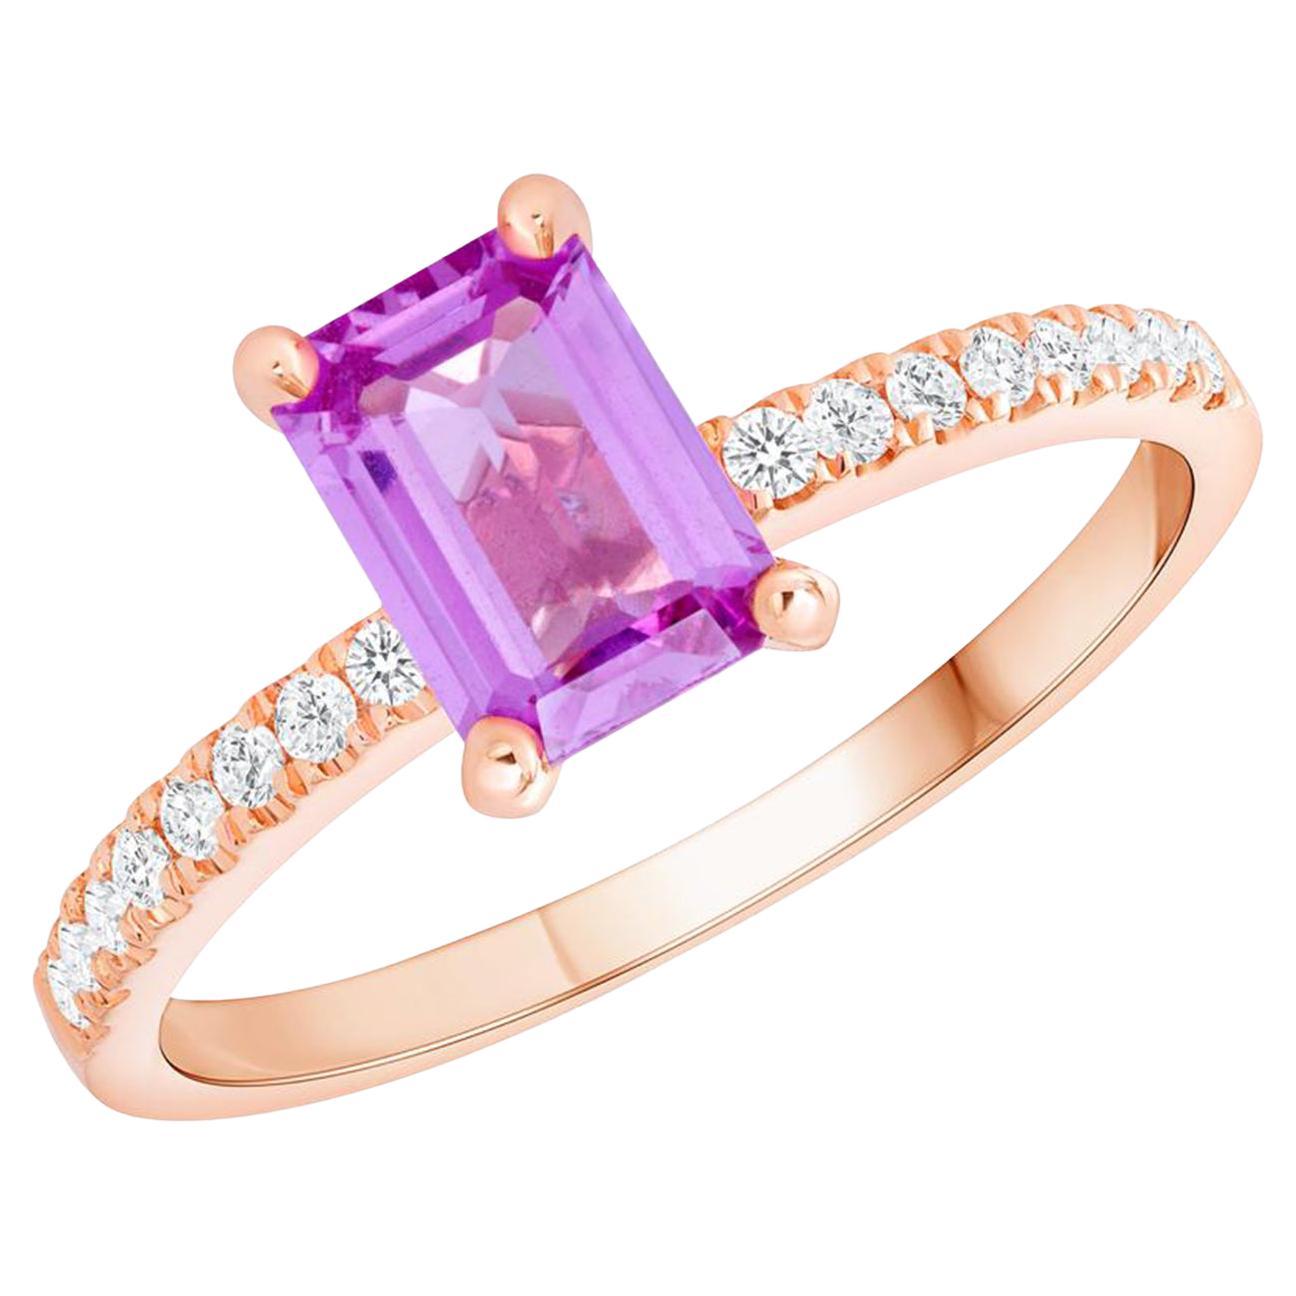 1.08 CT Pink Sapphire & 0.20 CT Diamonds in 14K Rose Gold Engagement Ring For Sale